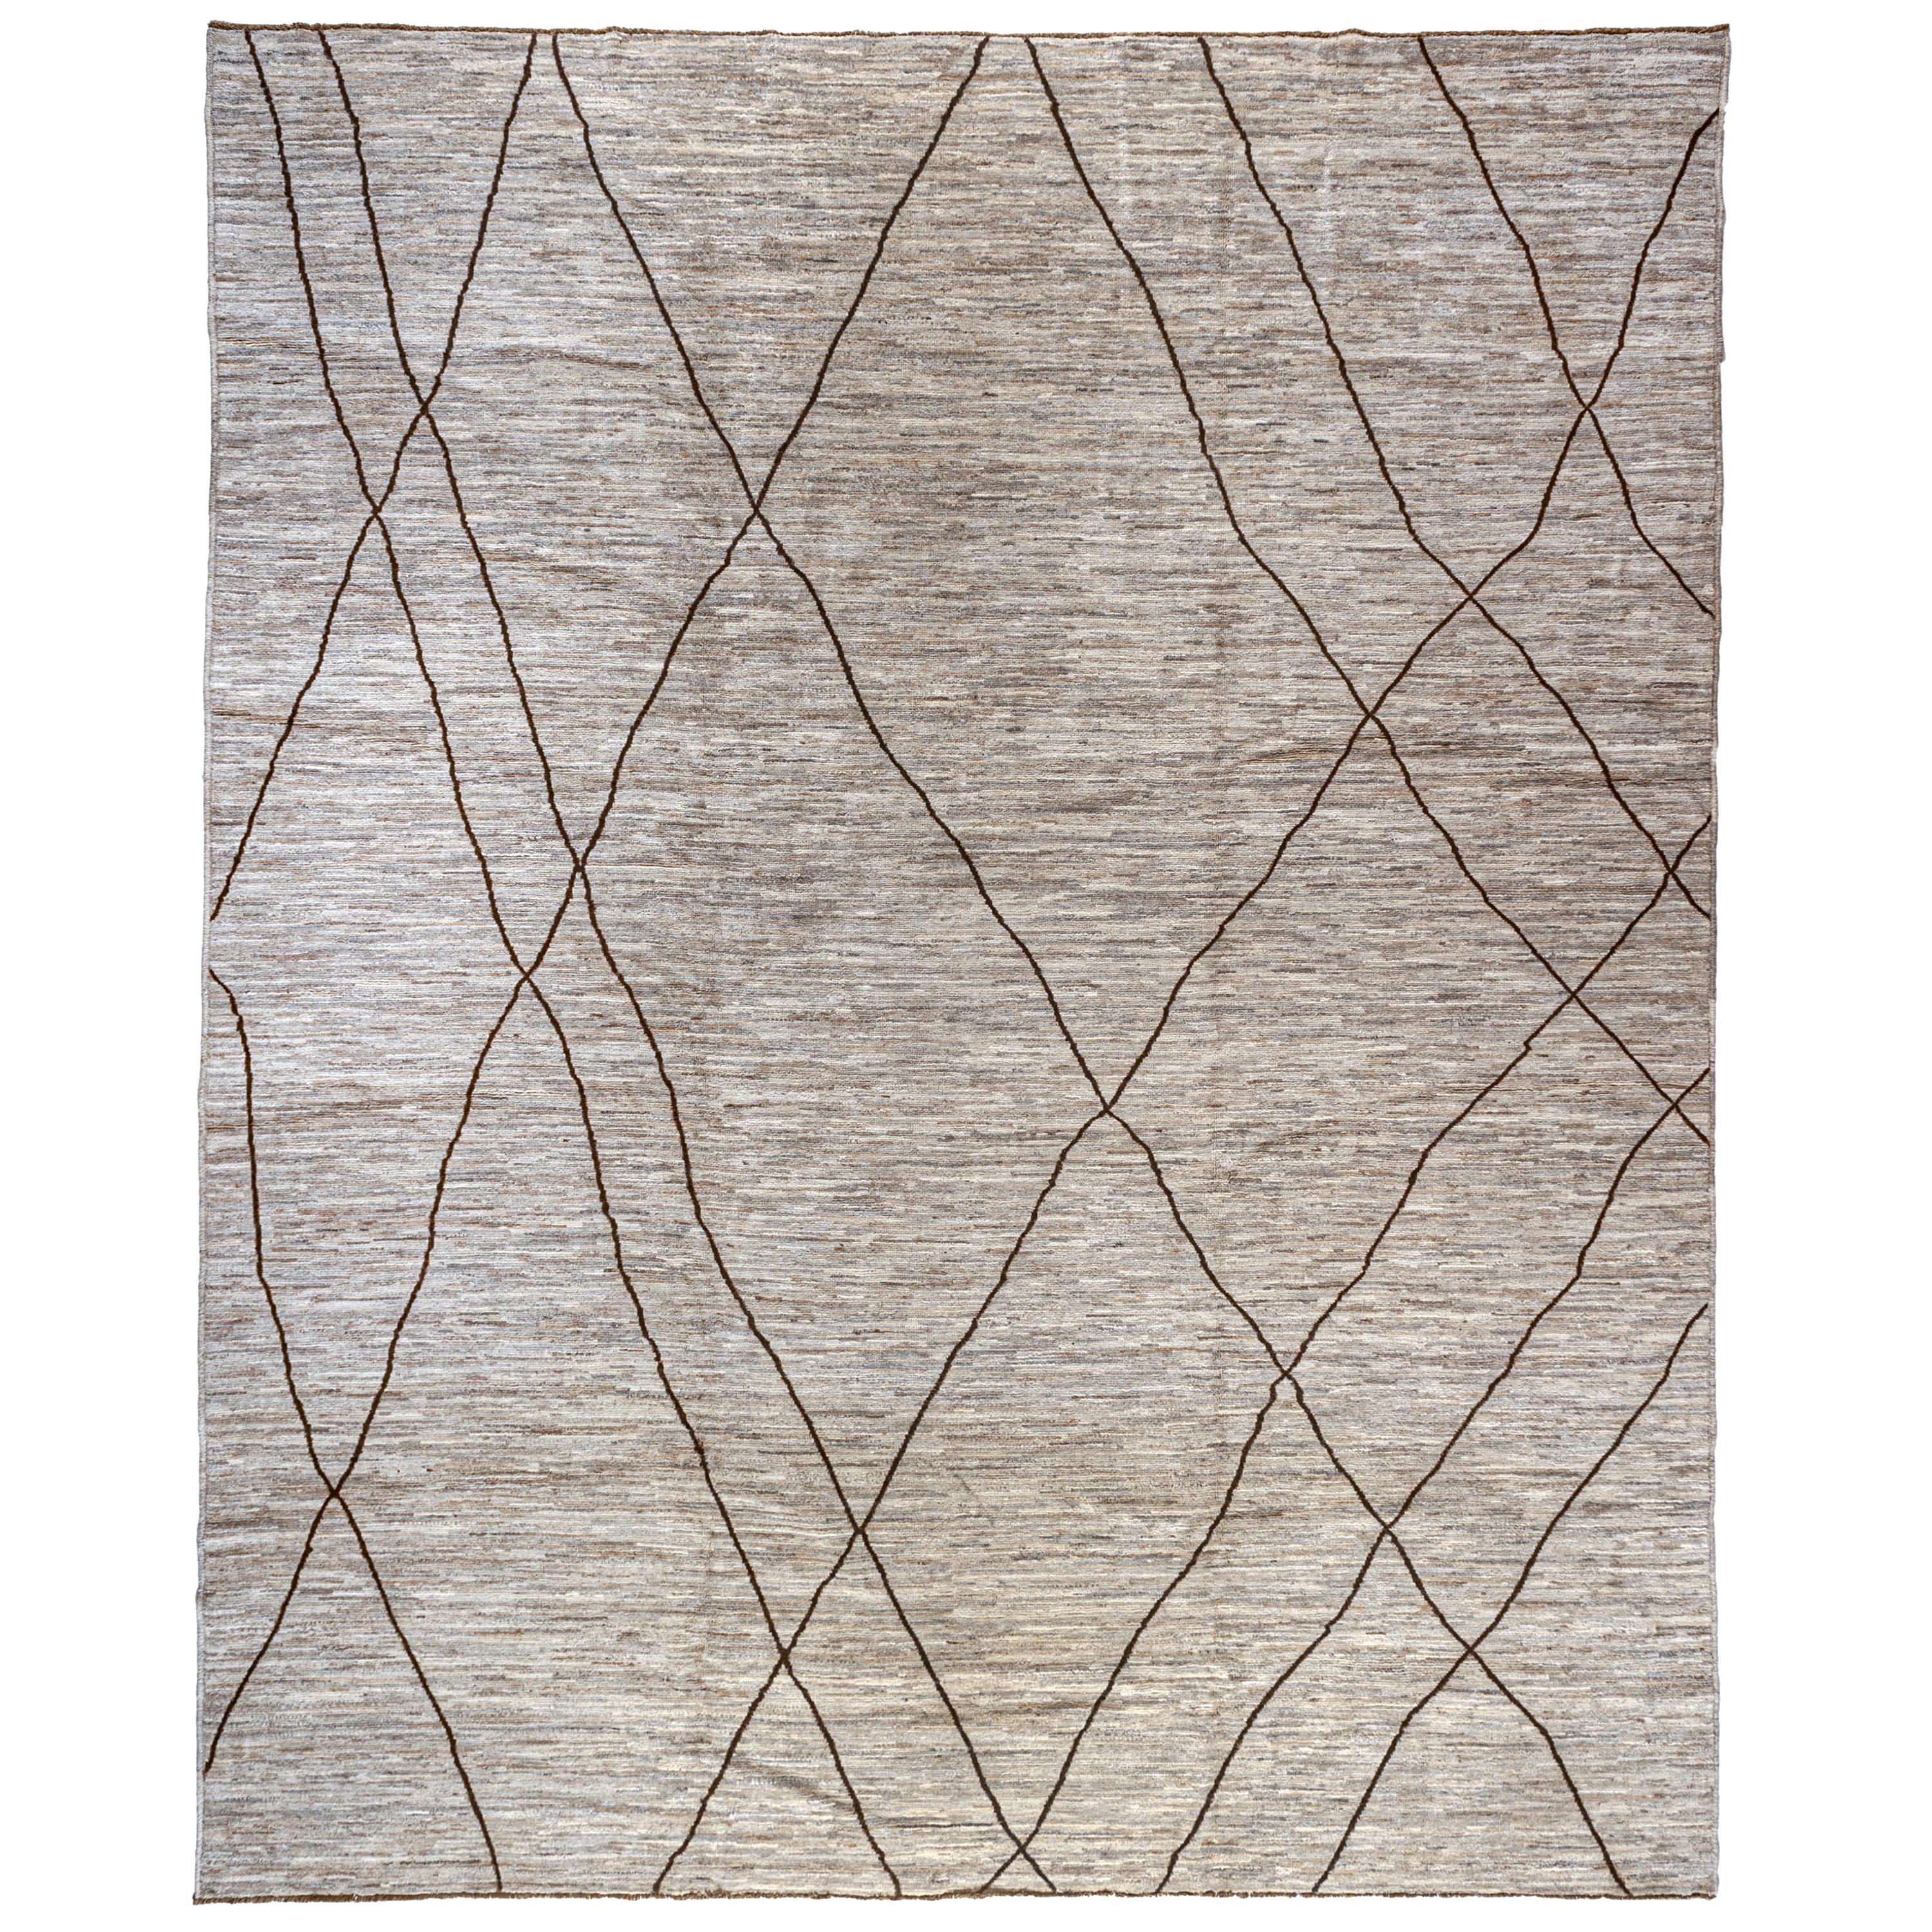 Taupe Moroccan Inspired Rug